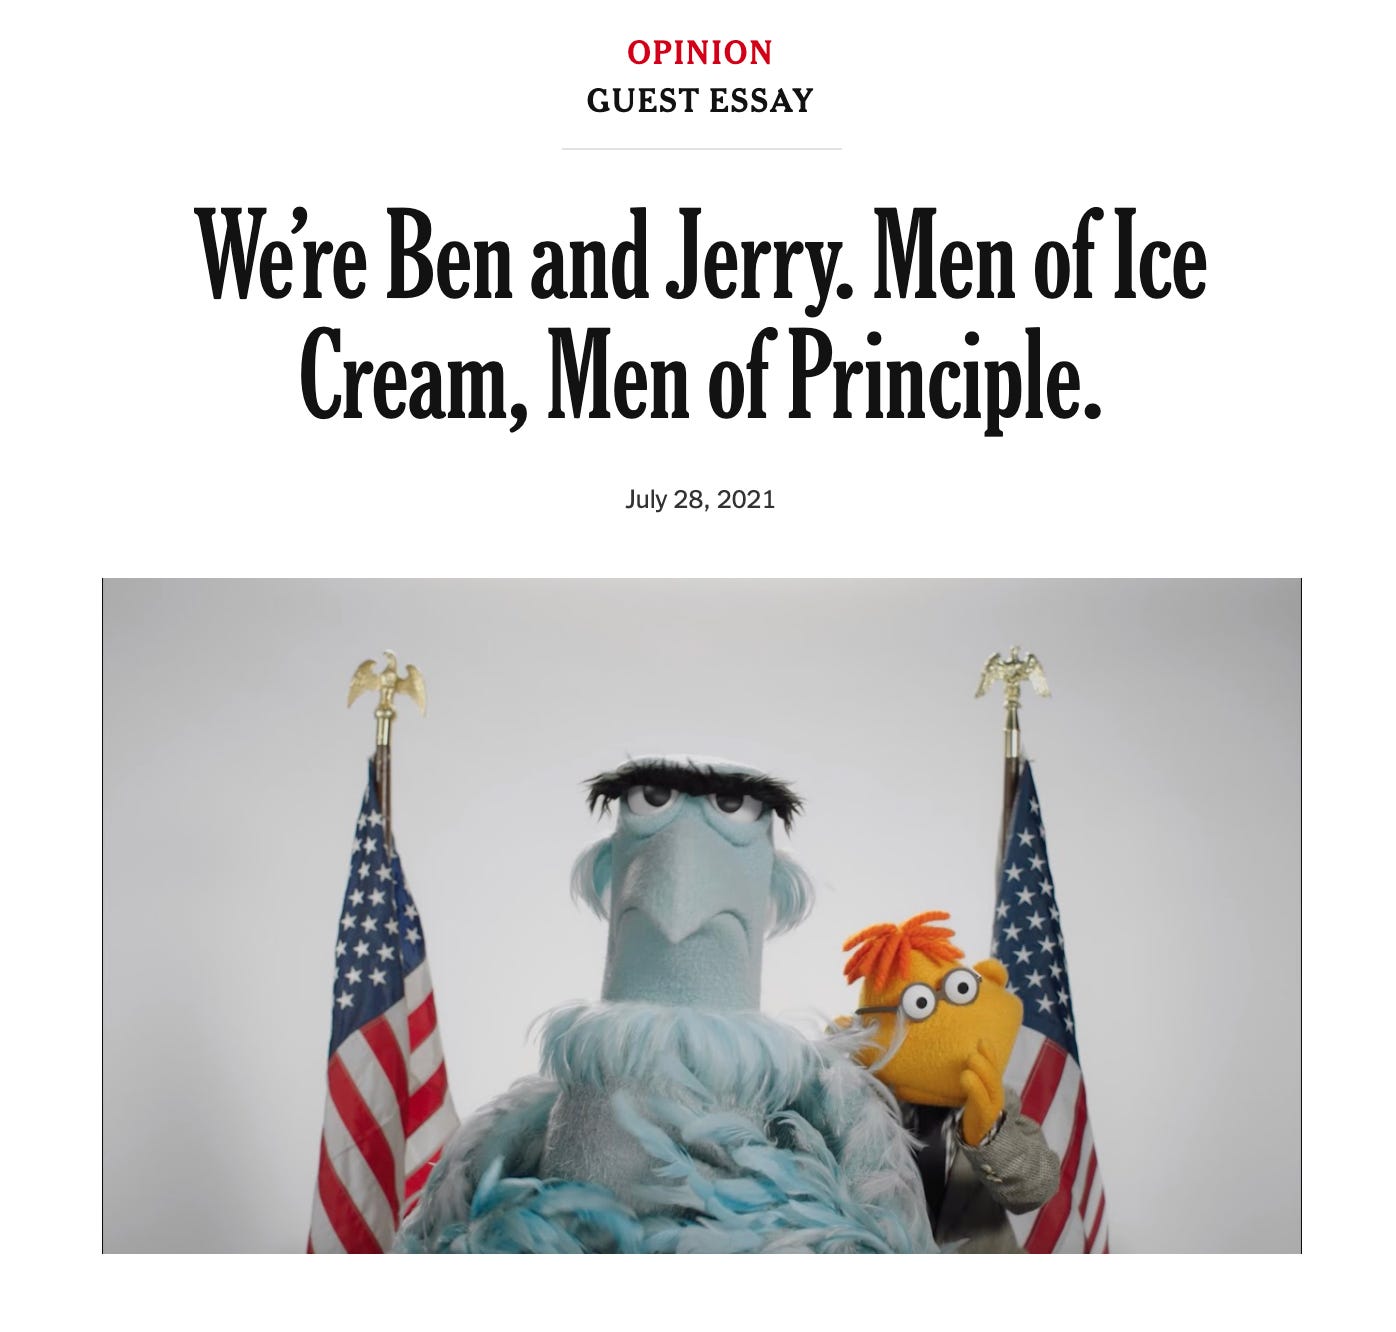 Mockup of the title and hero image of a NY Times guest essay titled "We're Ben and Jerry. Men of Ice Cream, Men of Principle." with an mage of Muppets Sam the Eagle and Scooter.